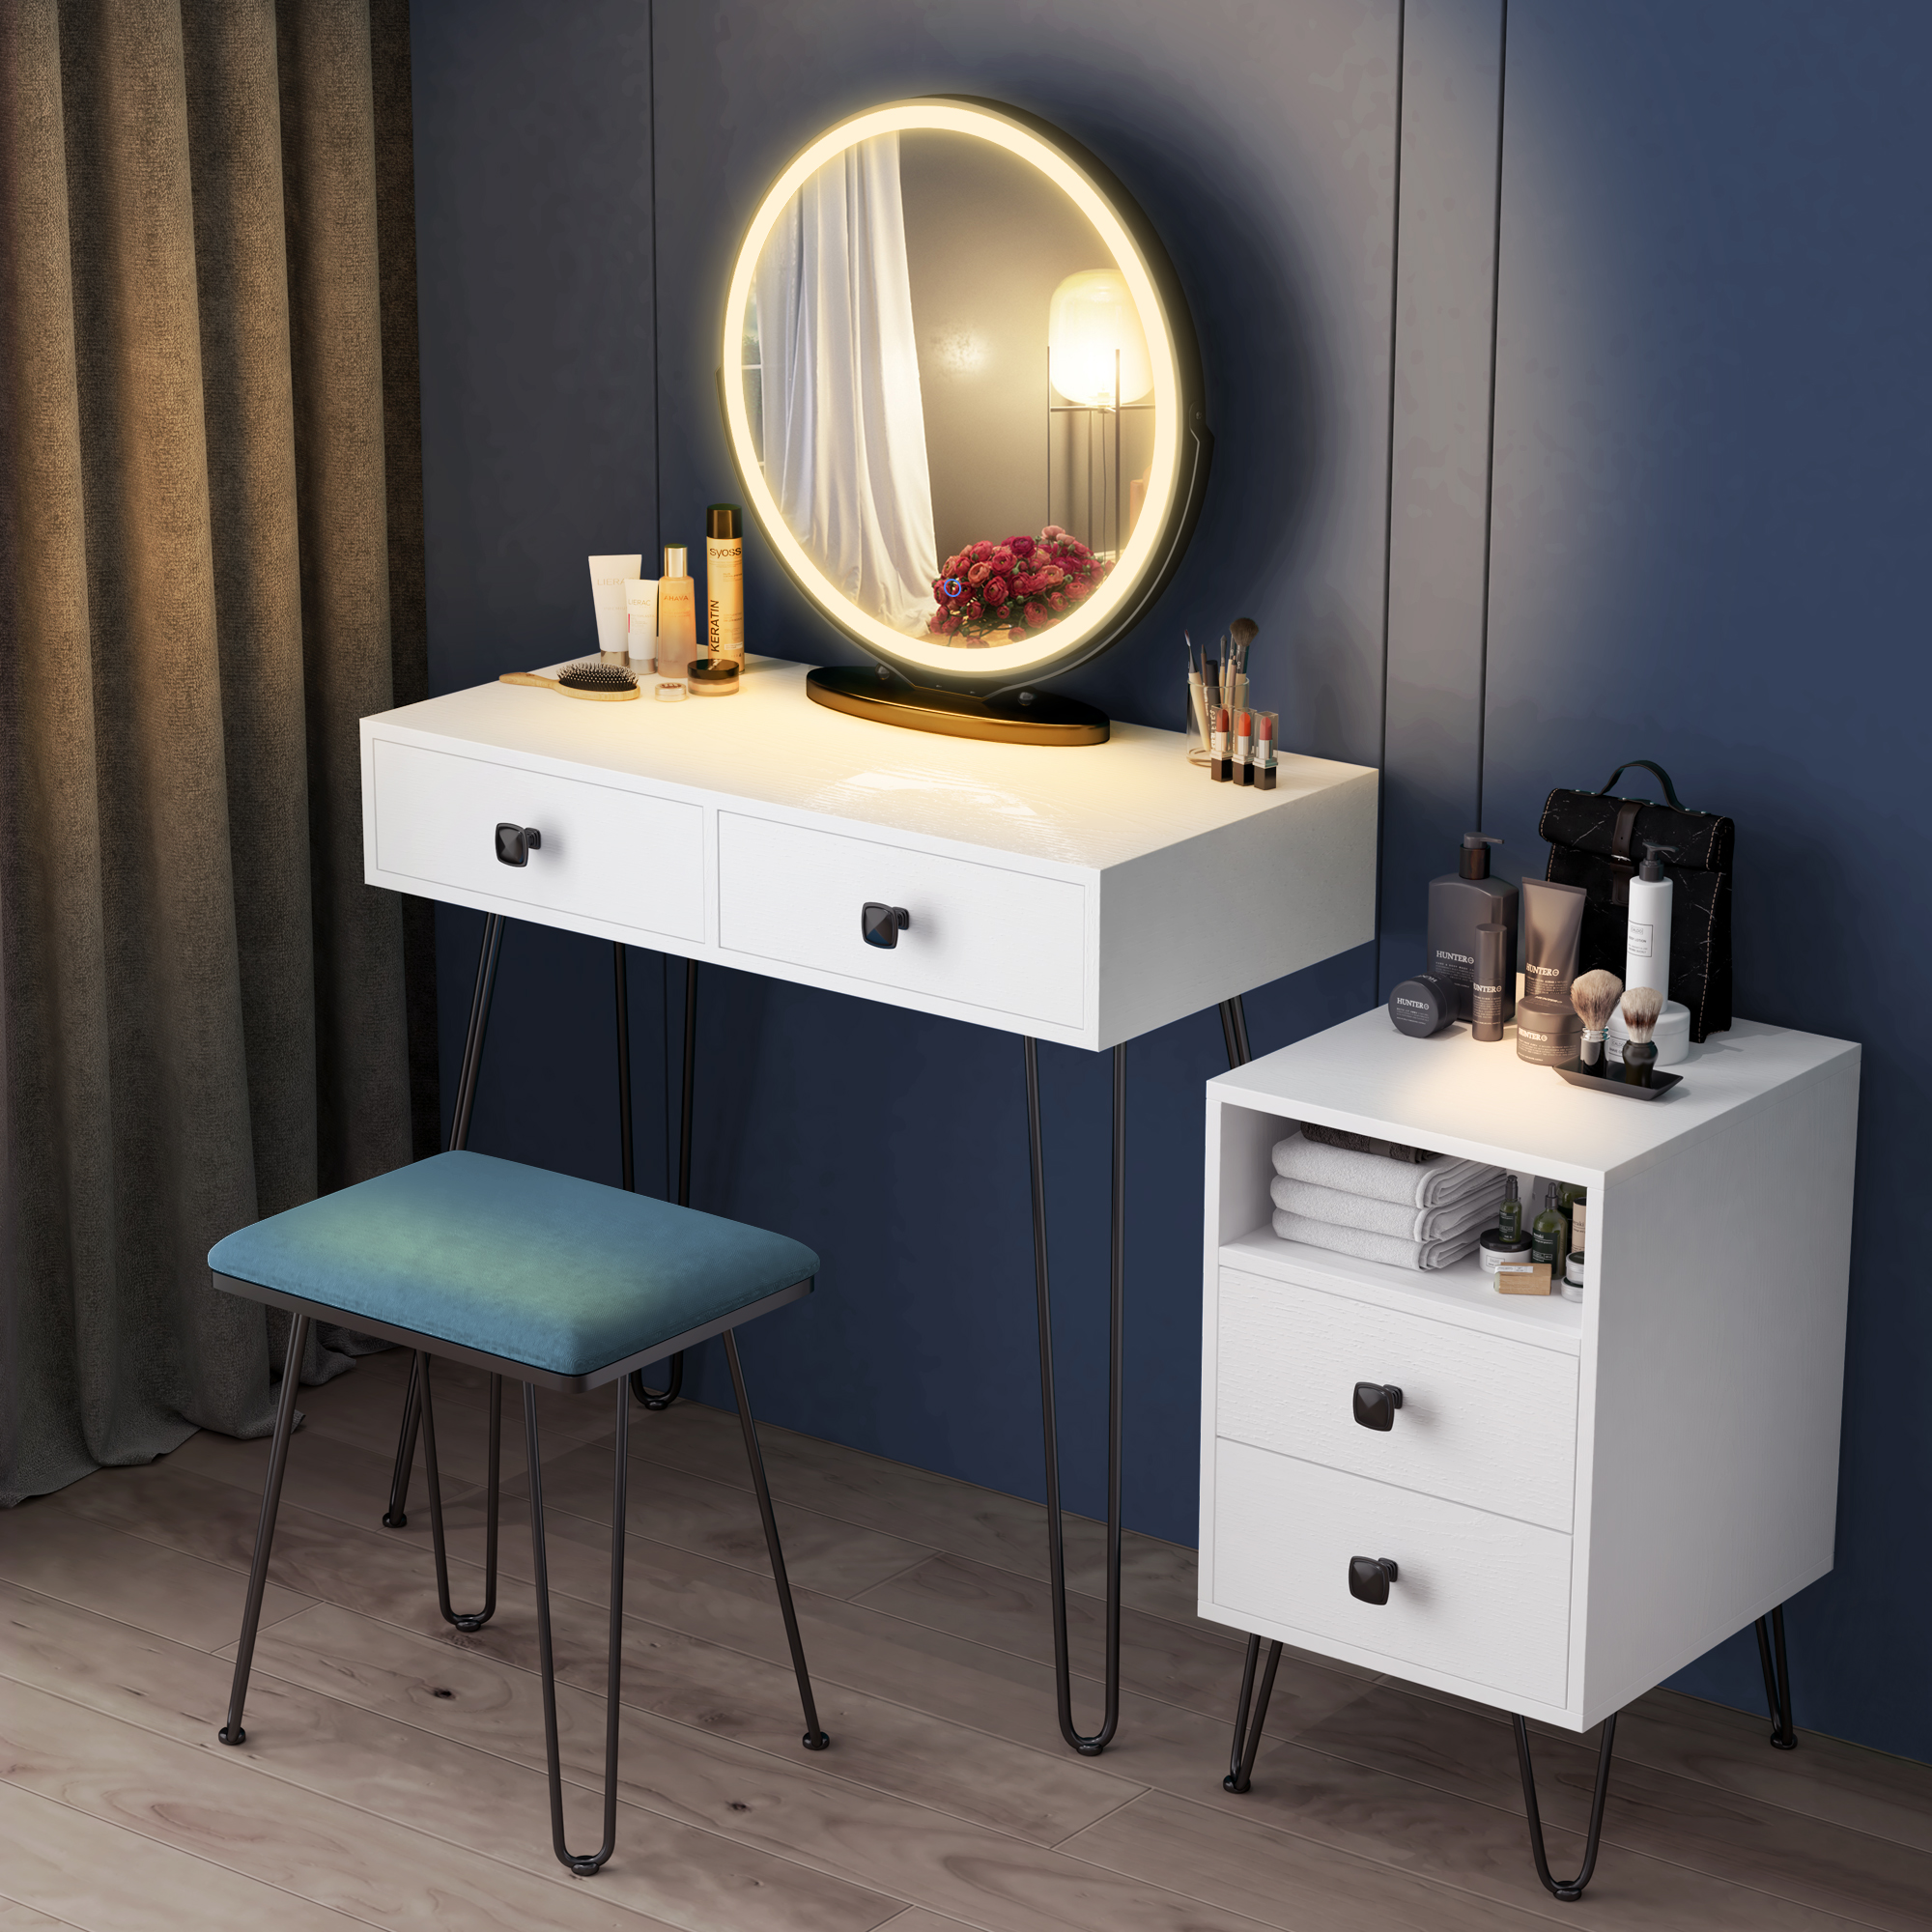 LVSOMT Vanity Desk Sets with Round Lighted Makeup Mirror, 3-in-1 USB Charge  Station, Makeup Dressing Table with Drawers, Bedroom Vainty with Stool  Brown 